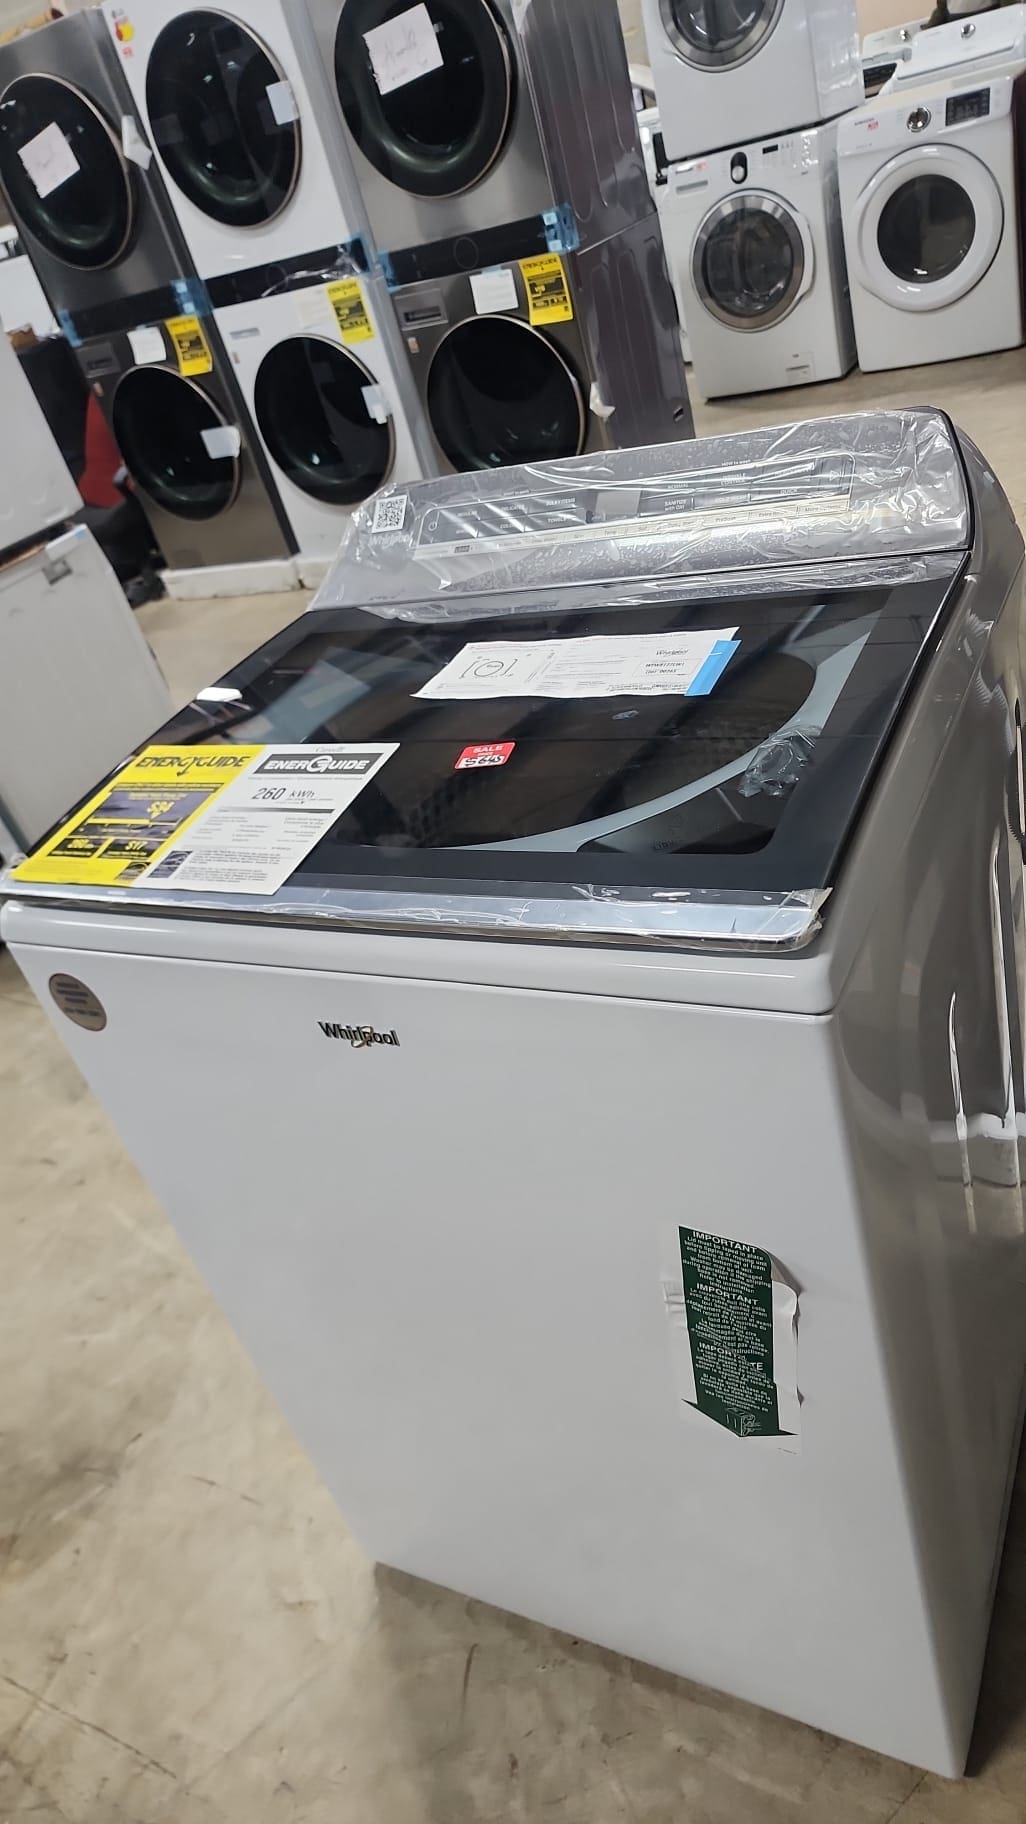 5.2 – 5.3 cu. ft. Top Load Washer